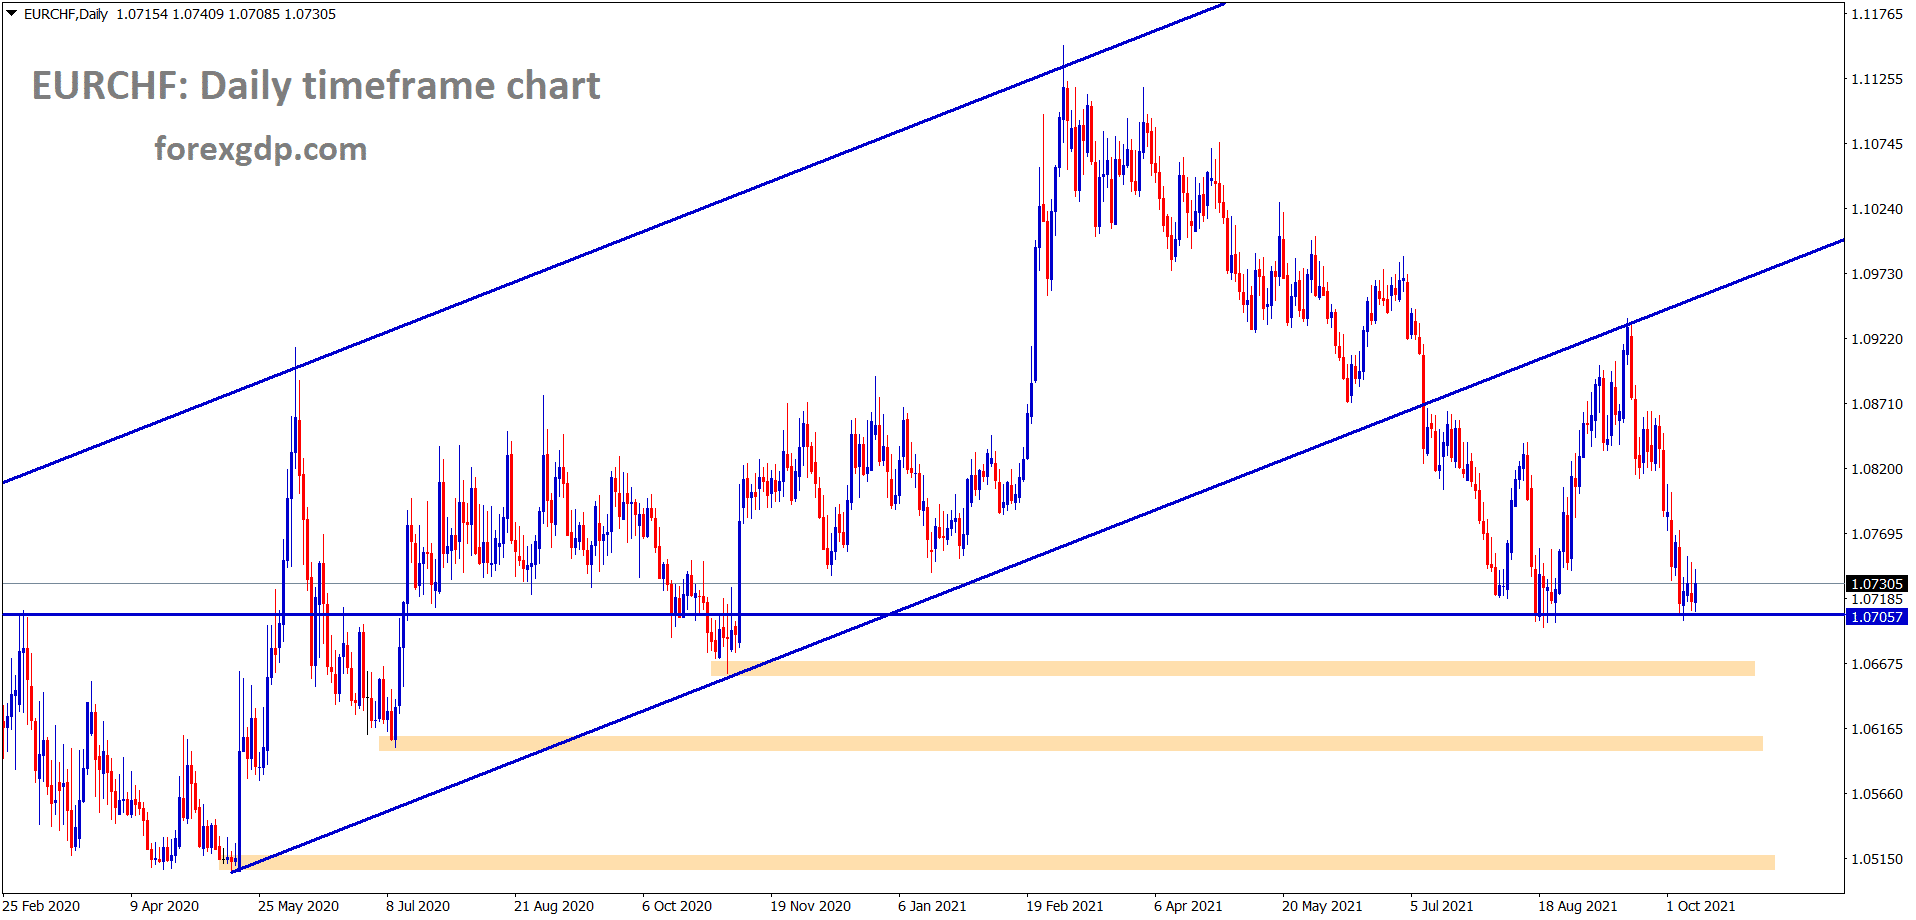 EURCHF is still standing at the support area wait for breakout or reversal